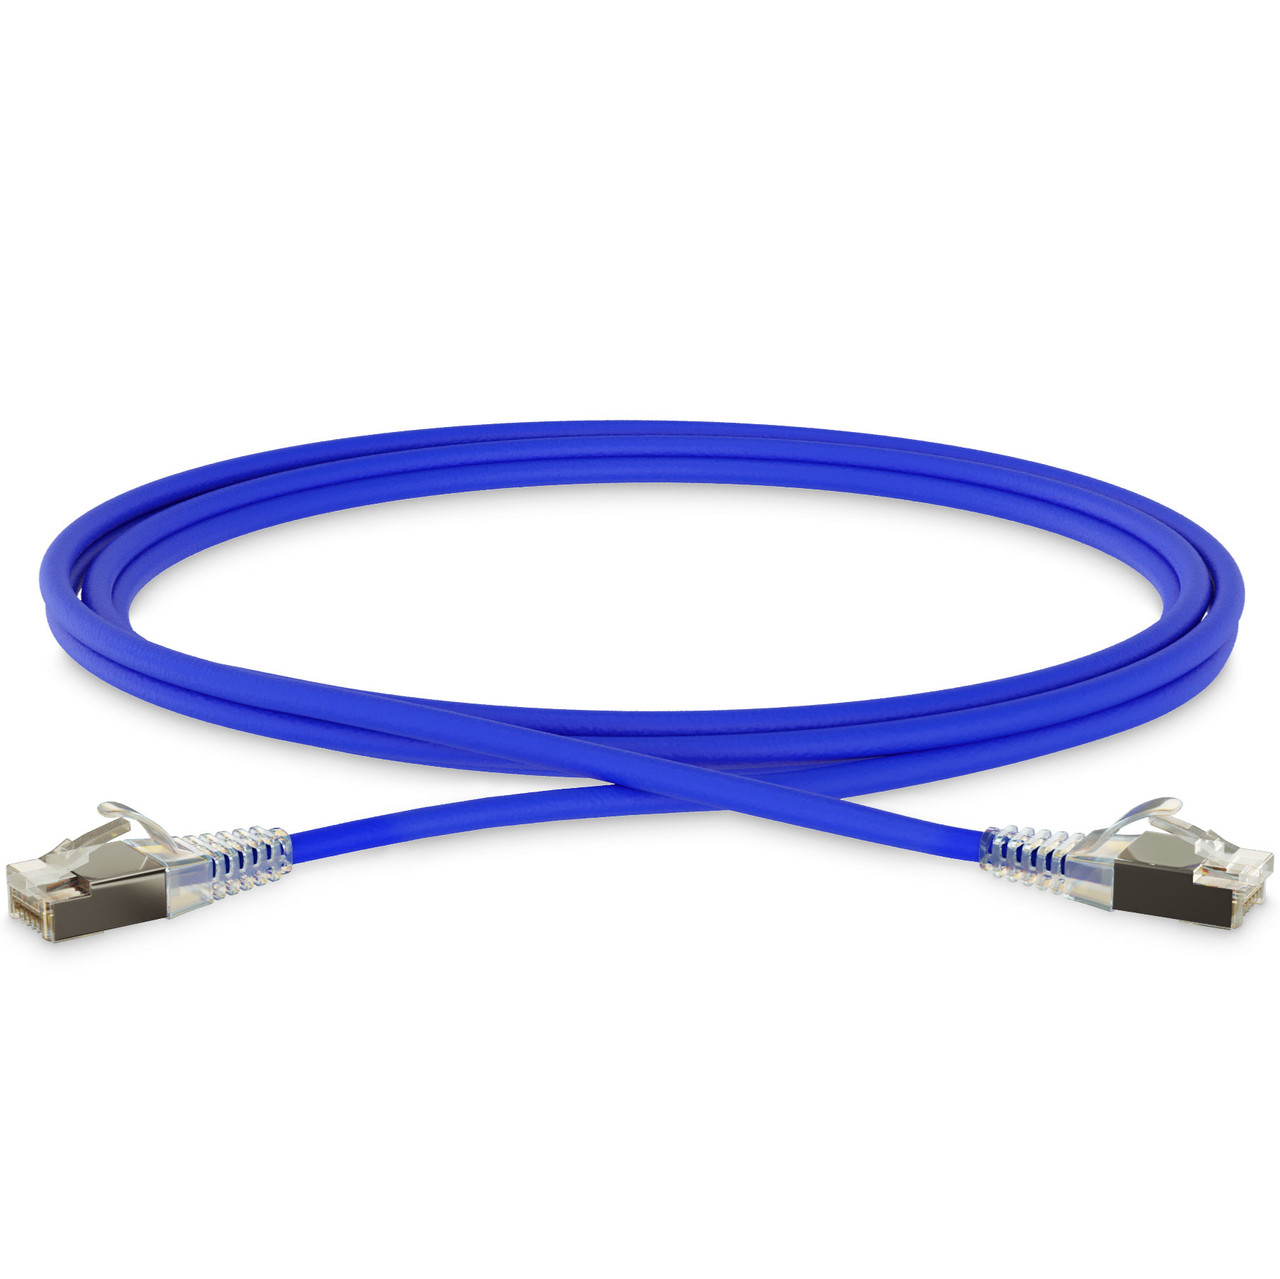 CAT7 Ethernet Patch Cables - Category 7 Snagless Network Cables